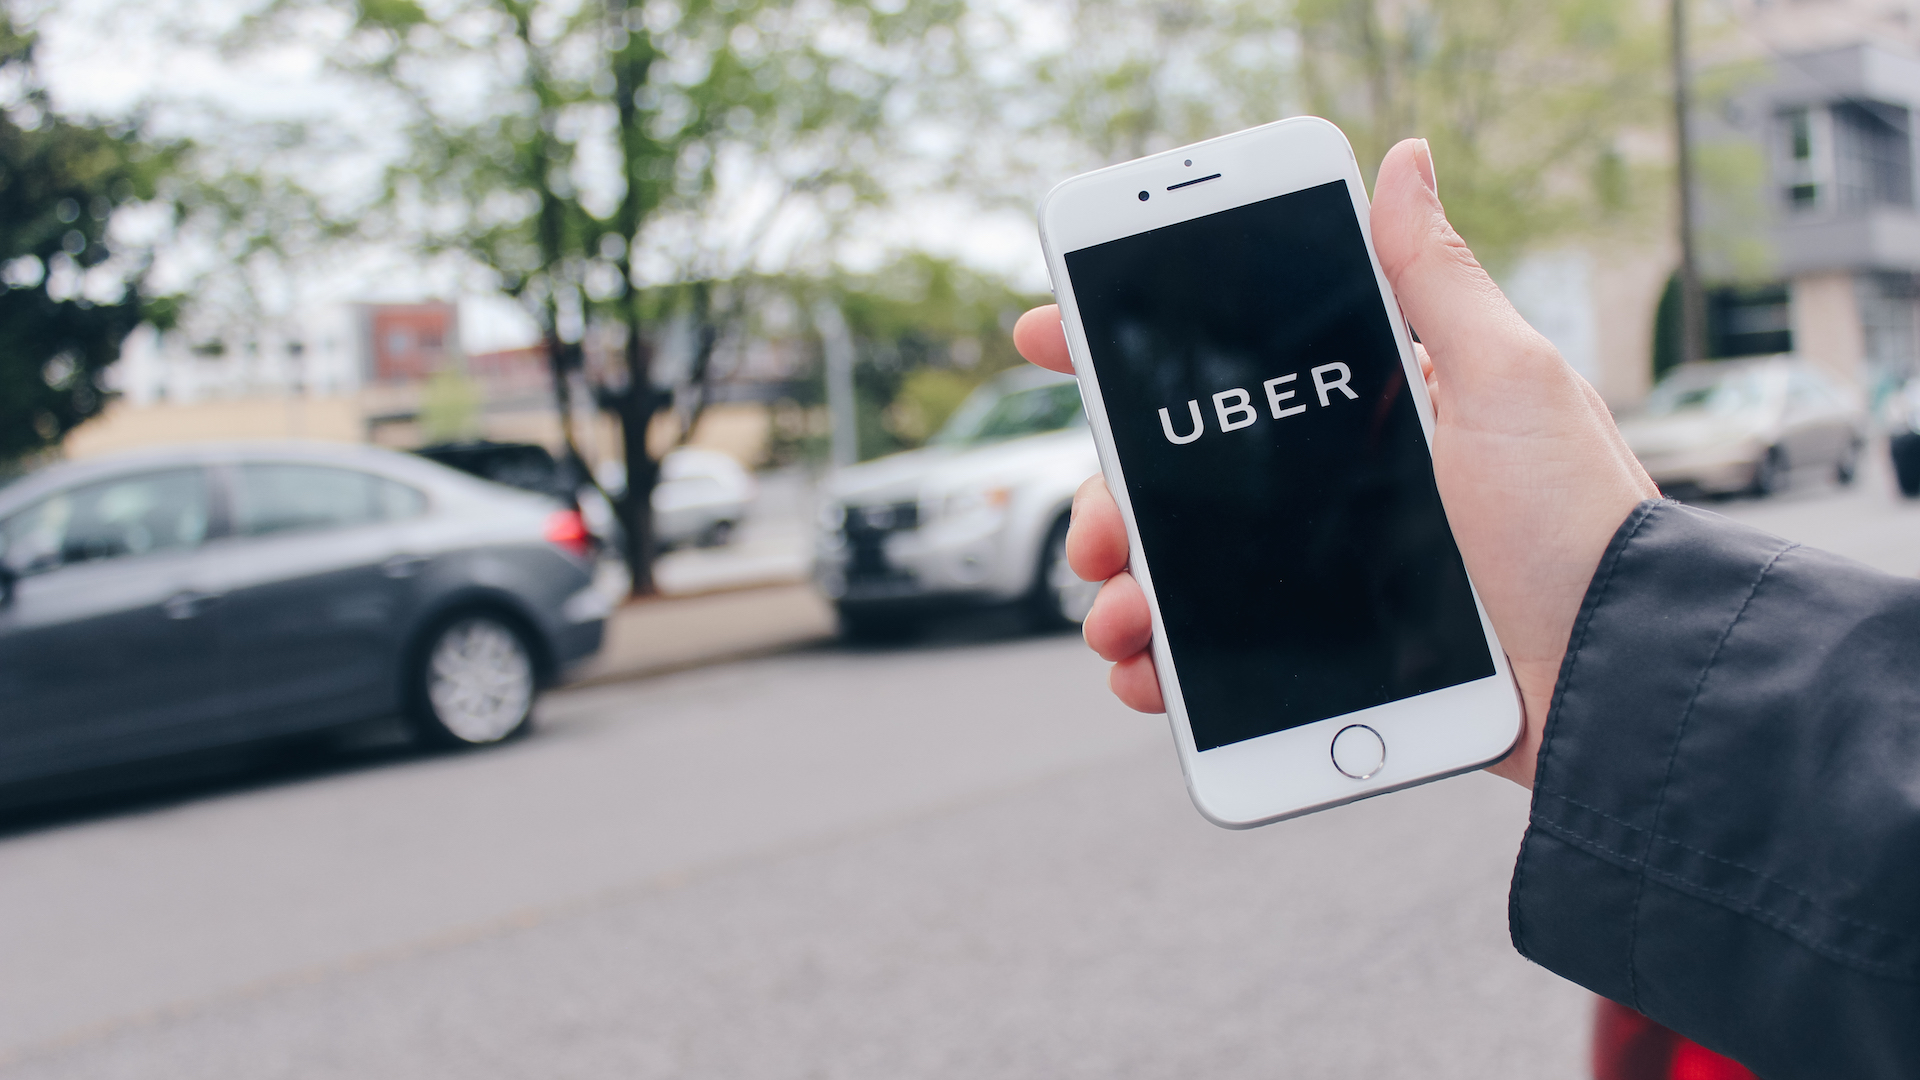 A hand comes in from the side of the screen holding a mobile phone with the Uber app open. Cars are out of focus in the background